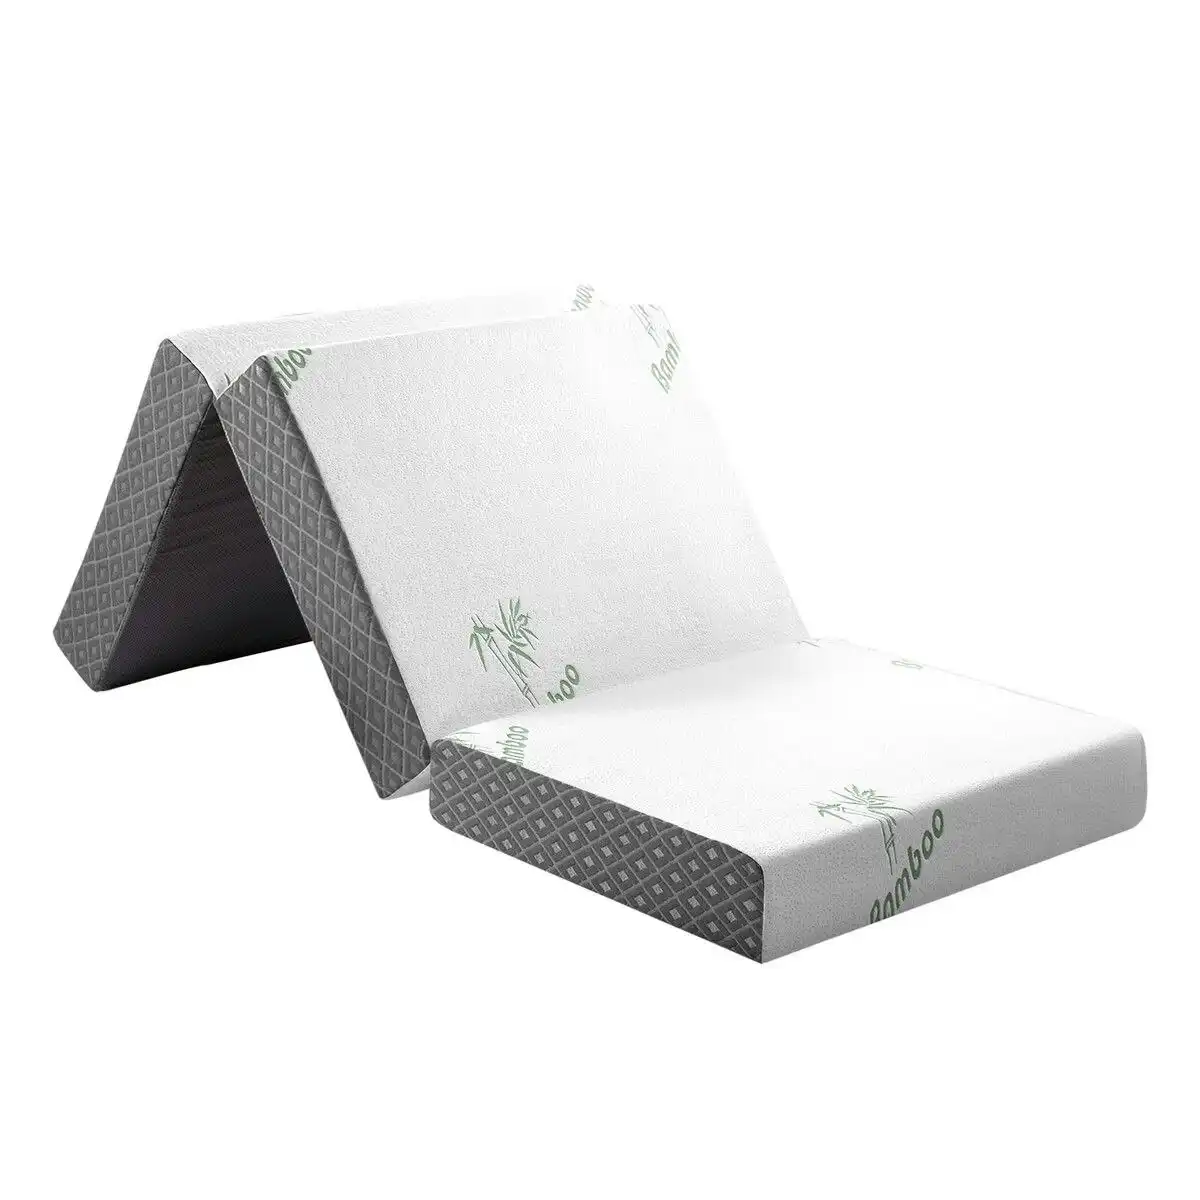 Luxdream Foldable Foam Mattress Cot Trifold Sofa Bed Extra Thick Sleeping Floor Mat Portable Camping Travel Cushion Bamboo Cover